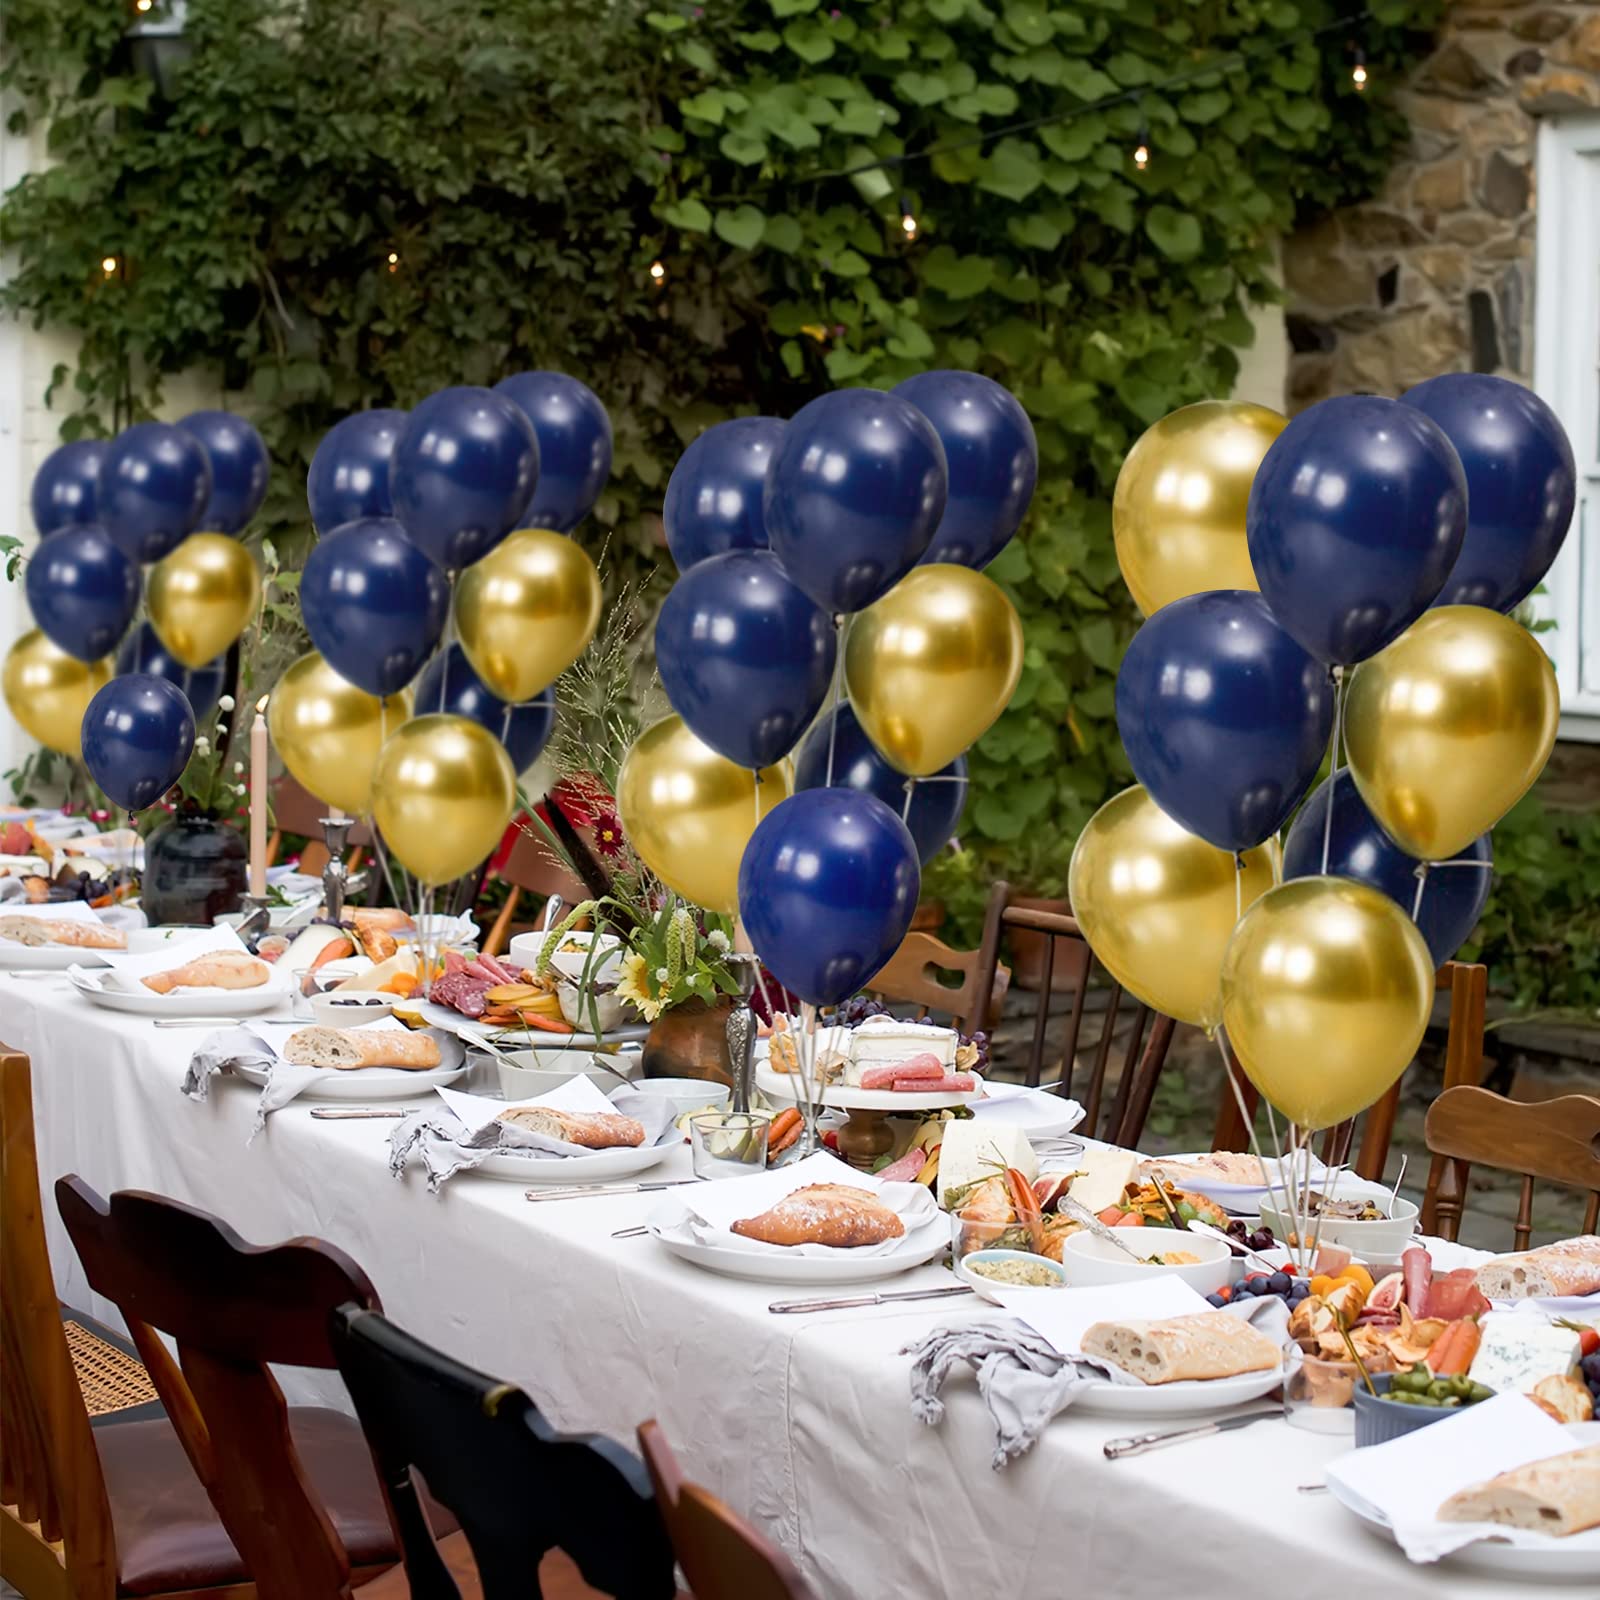 Navy Blue and Gold Balloons, 30pcs 12 Inch Balloons Metallic in Navy Blue and Gold Thick Chrome Metallic Inflatable Balloons for Birthday Wedding Baby Shower Festival Carnival Party Decorations